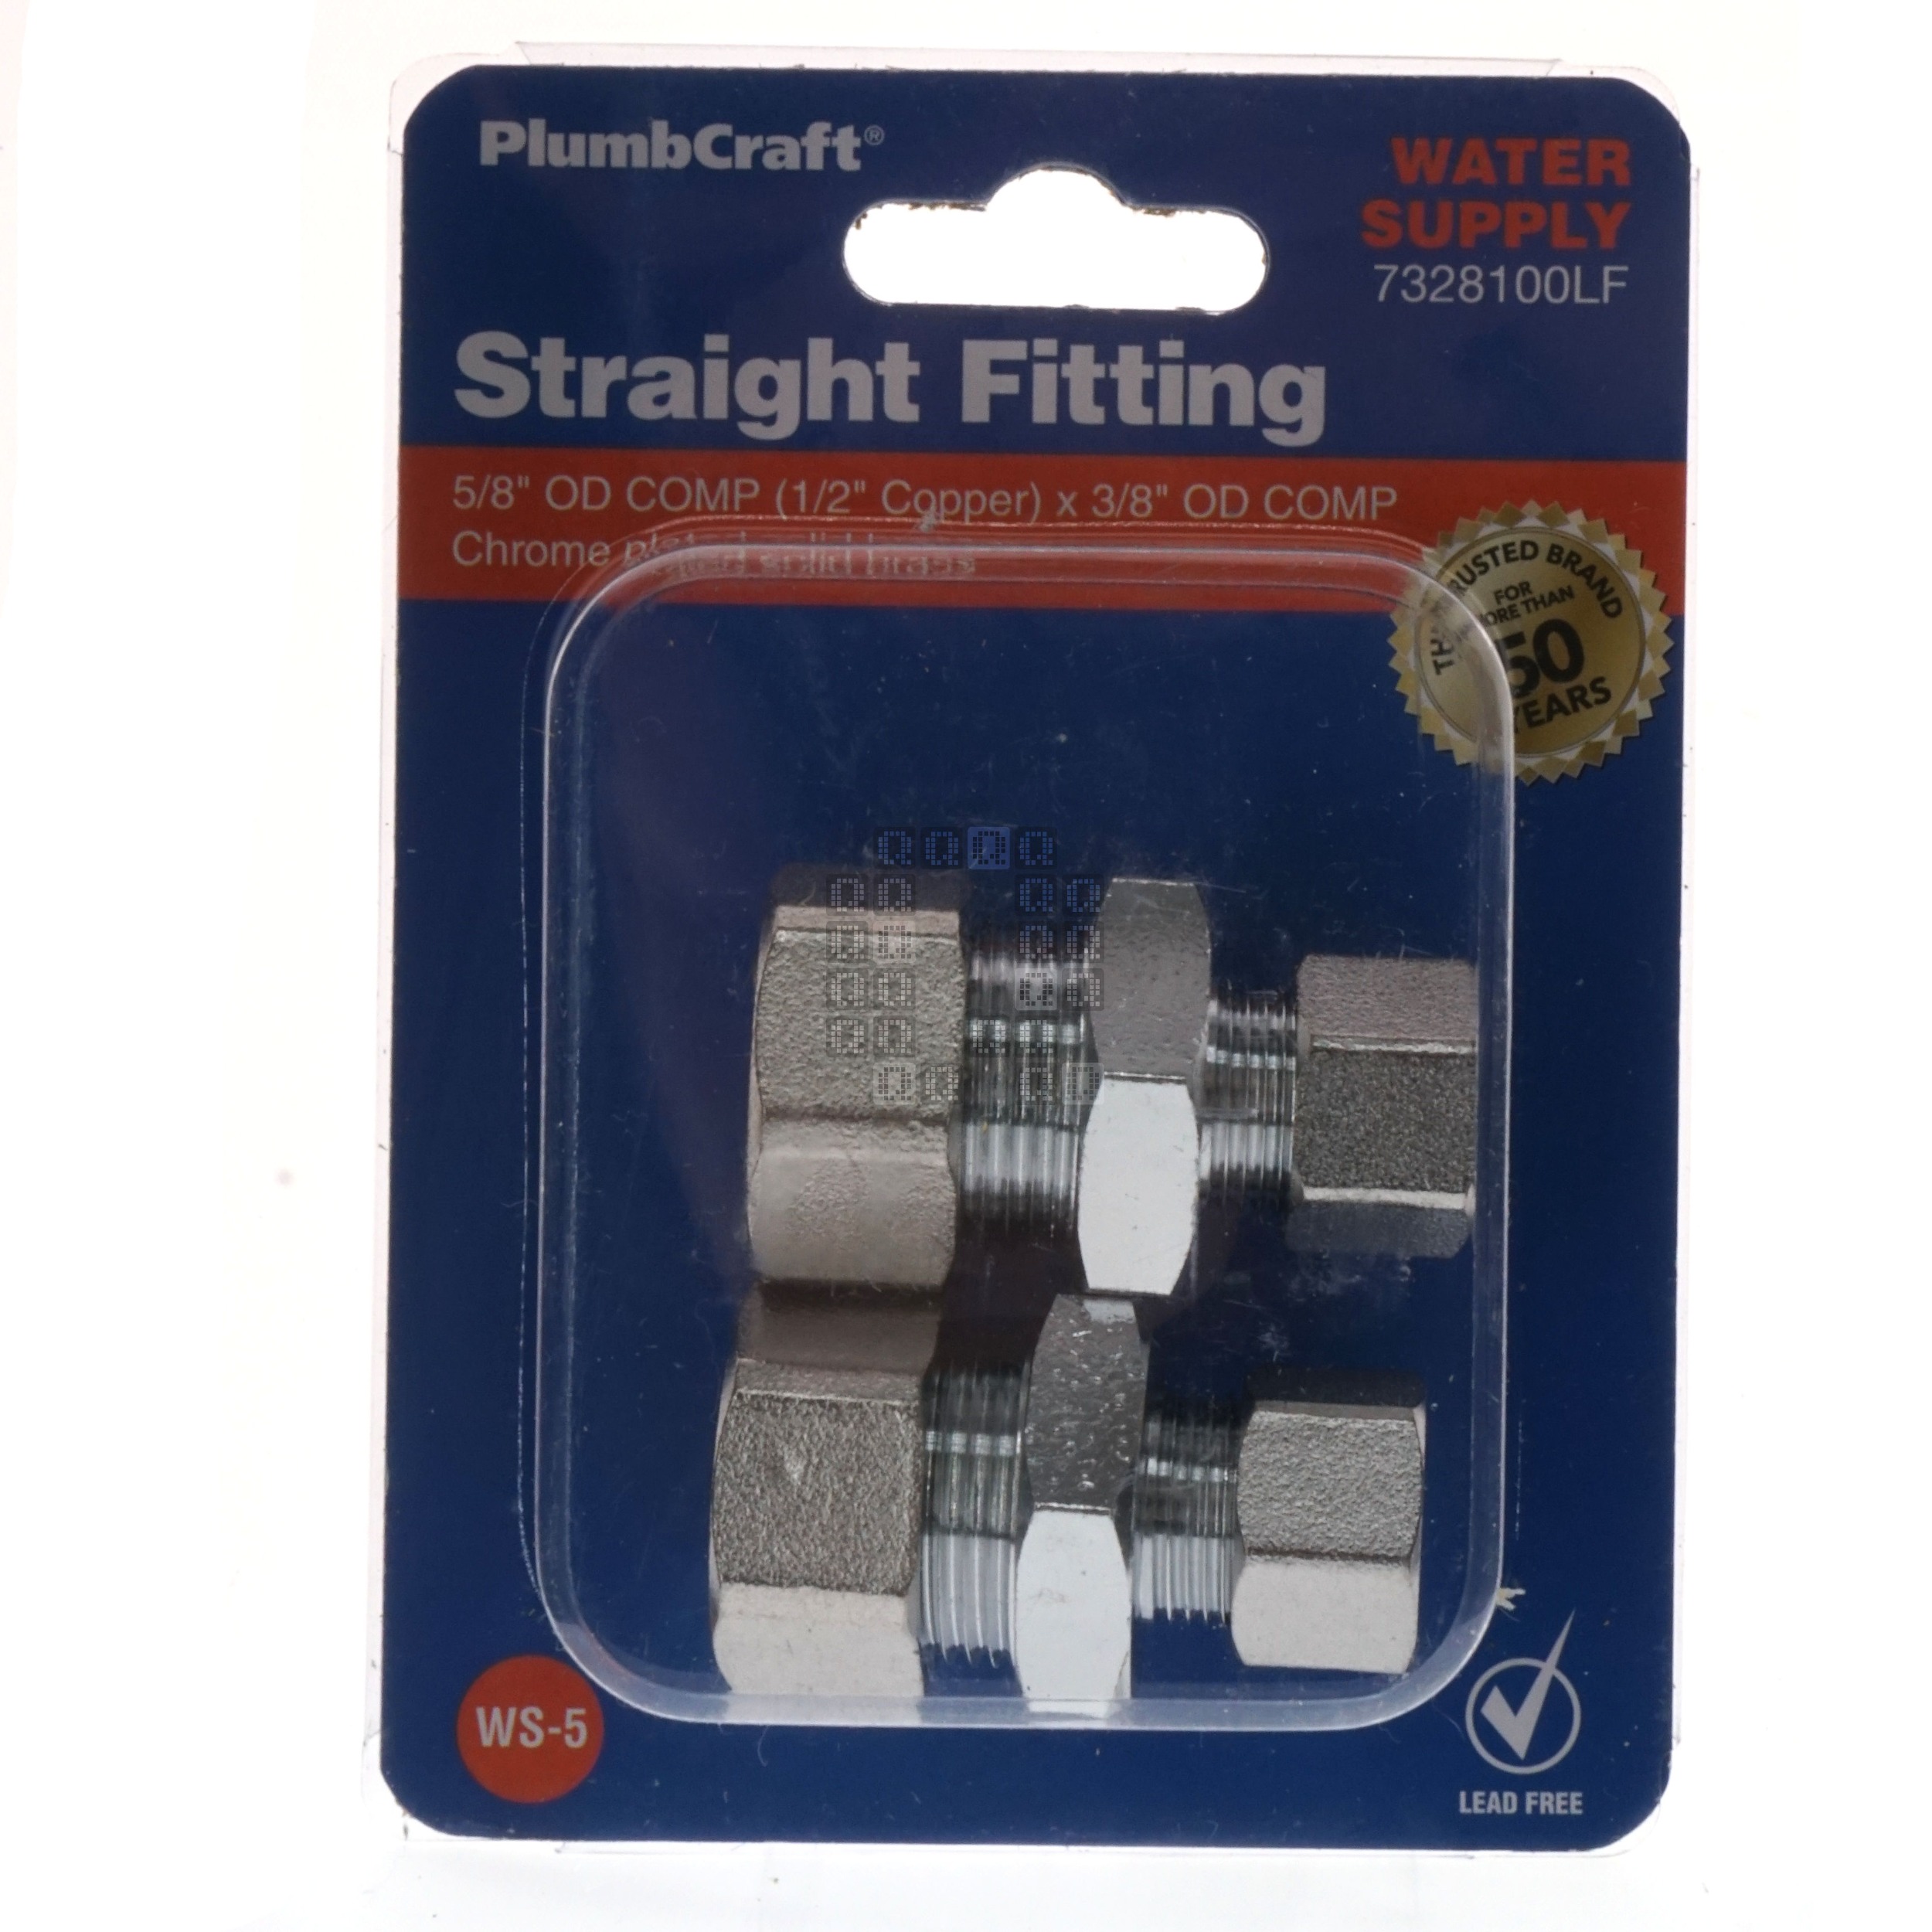 PlumbCraft 7328100LF Water Supply Straight Fitting, 5/8" OD x 3/8" OD Compression